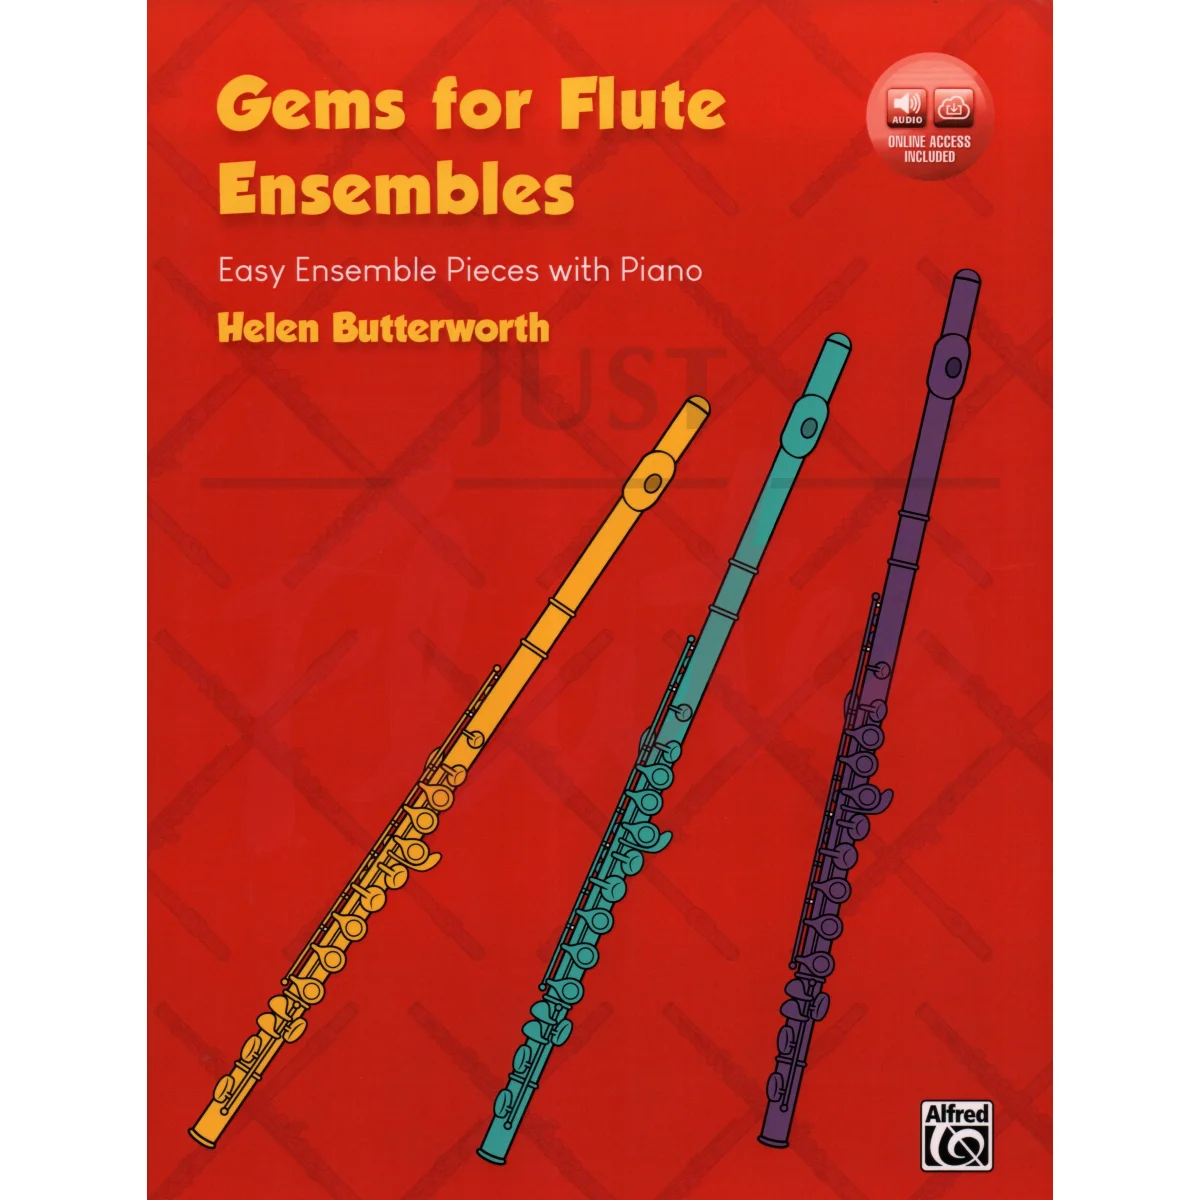 Gems for Flute Ensembles with Piano